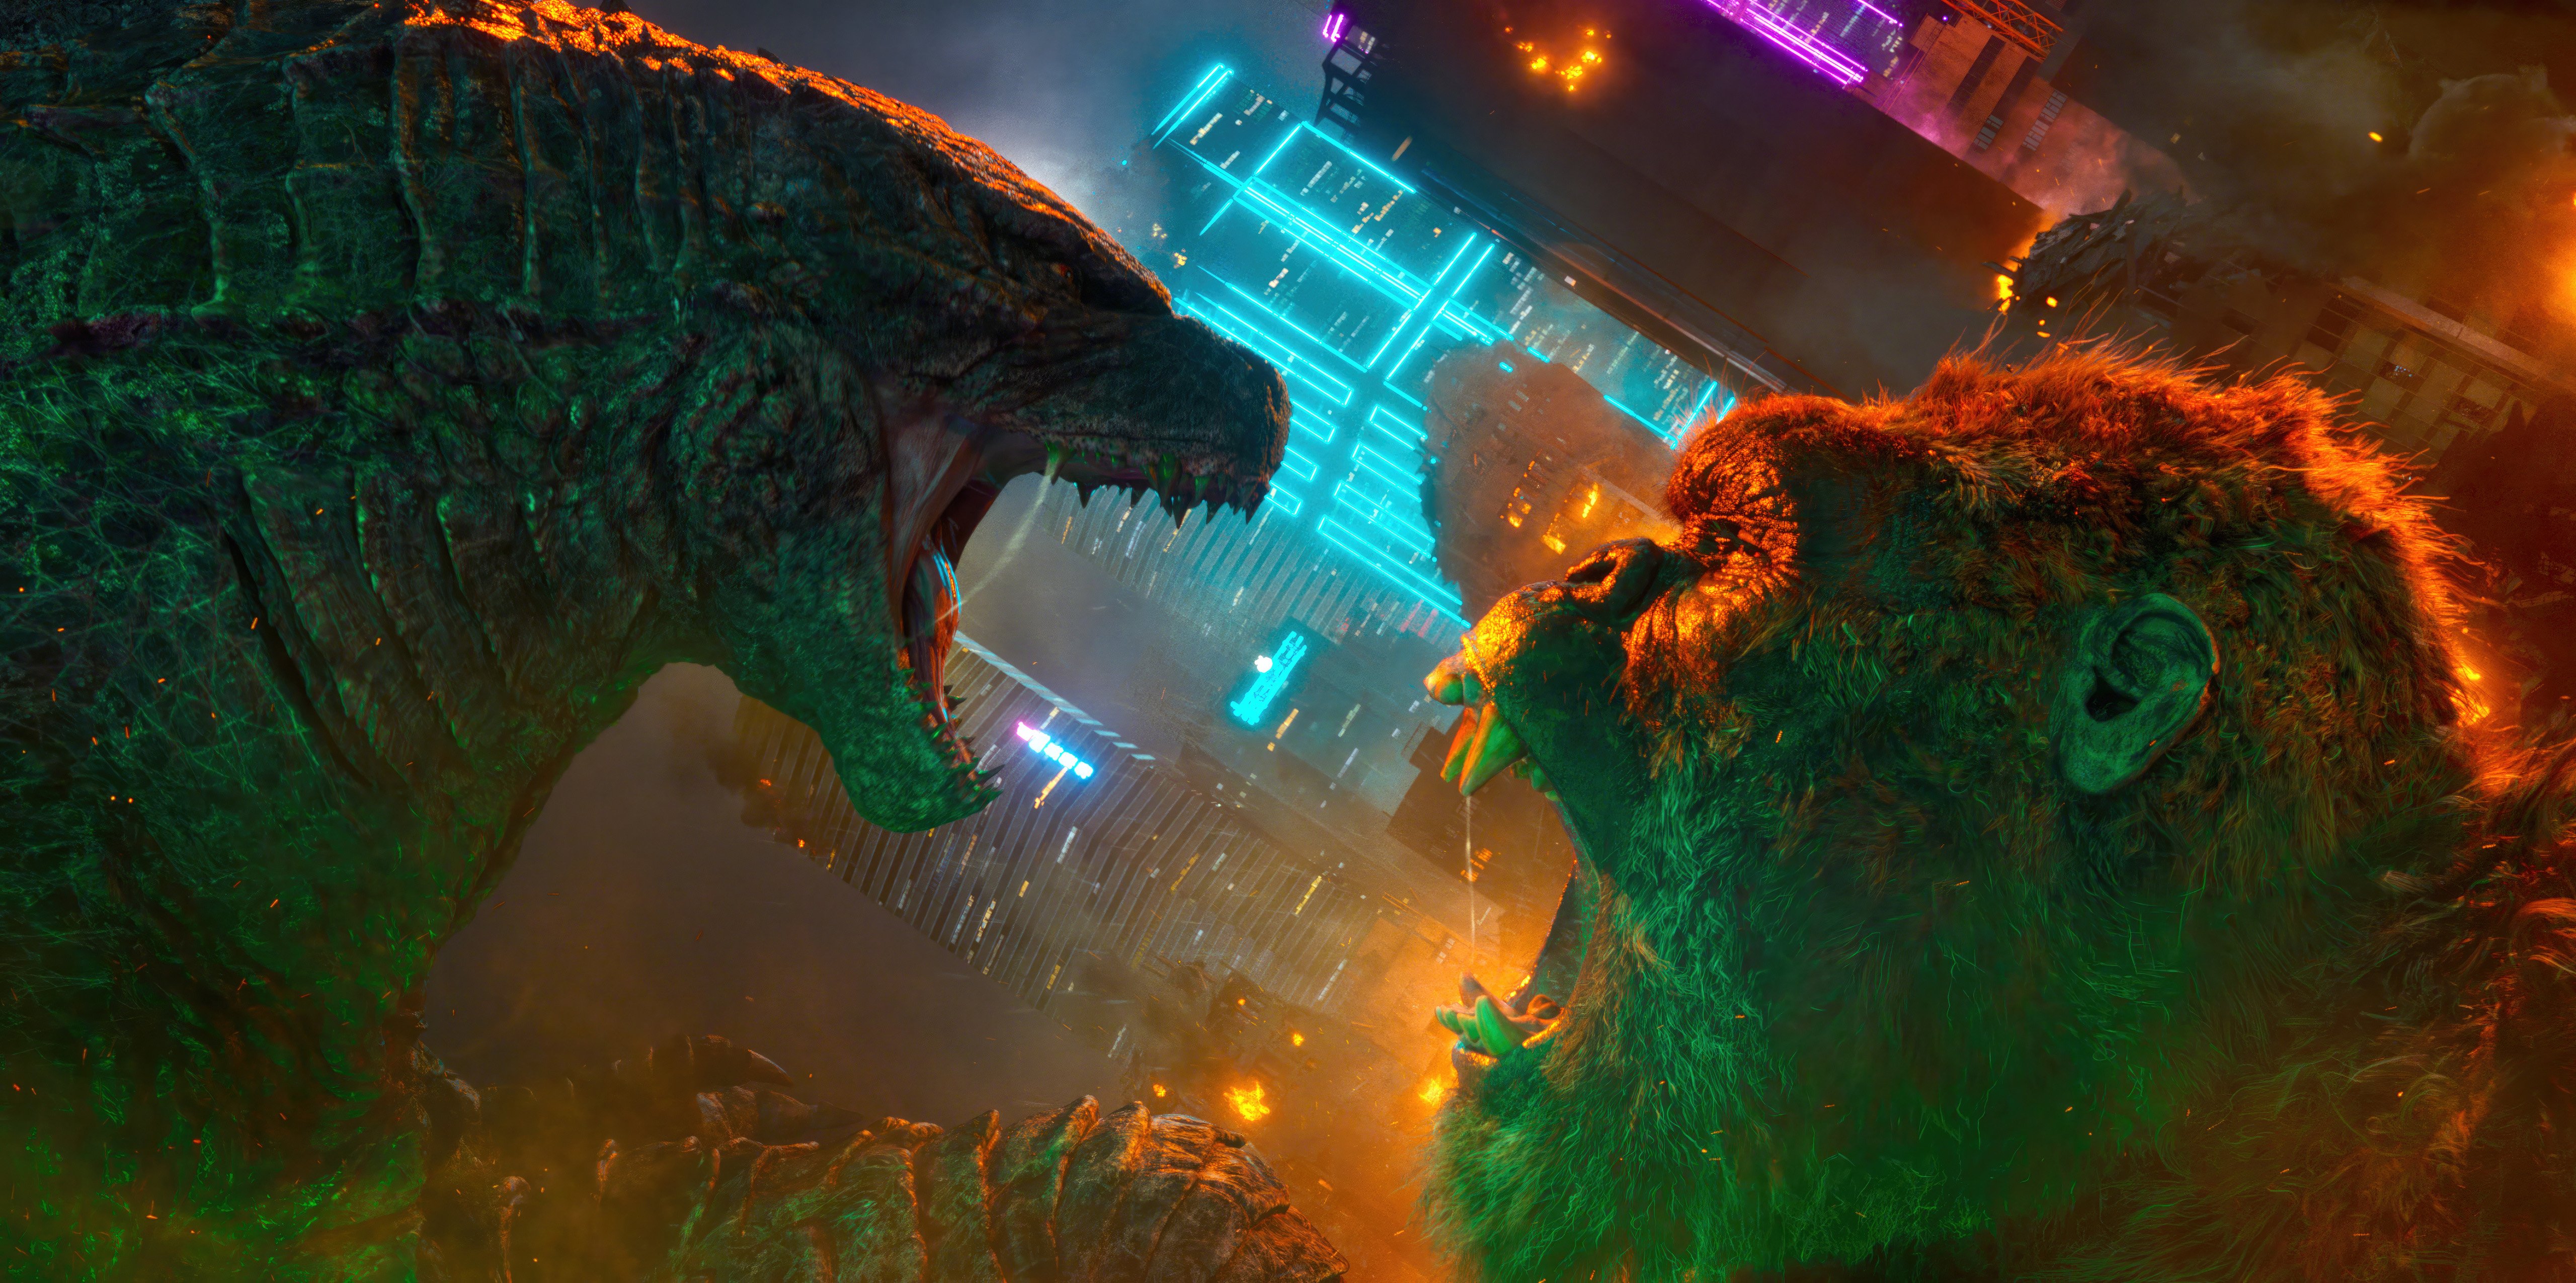 Godzilla x Kong: The New Empire wallpaper Resolution 5120x2550 | Best Download this awesome wallpaper - Cool Wallpaper HD - CoolWallpaper-HD.com